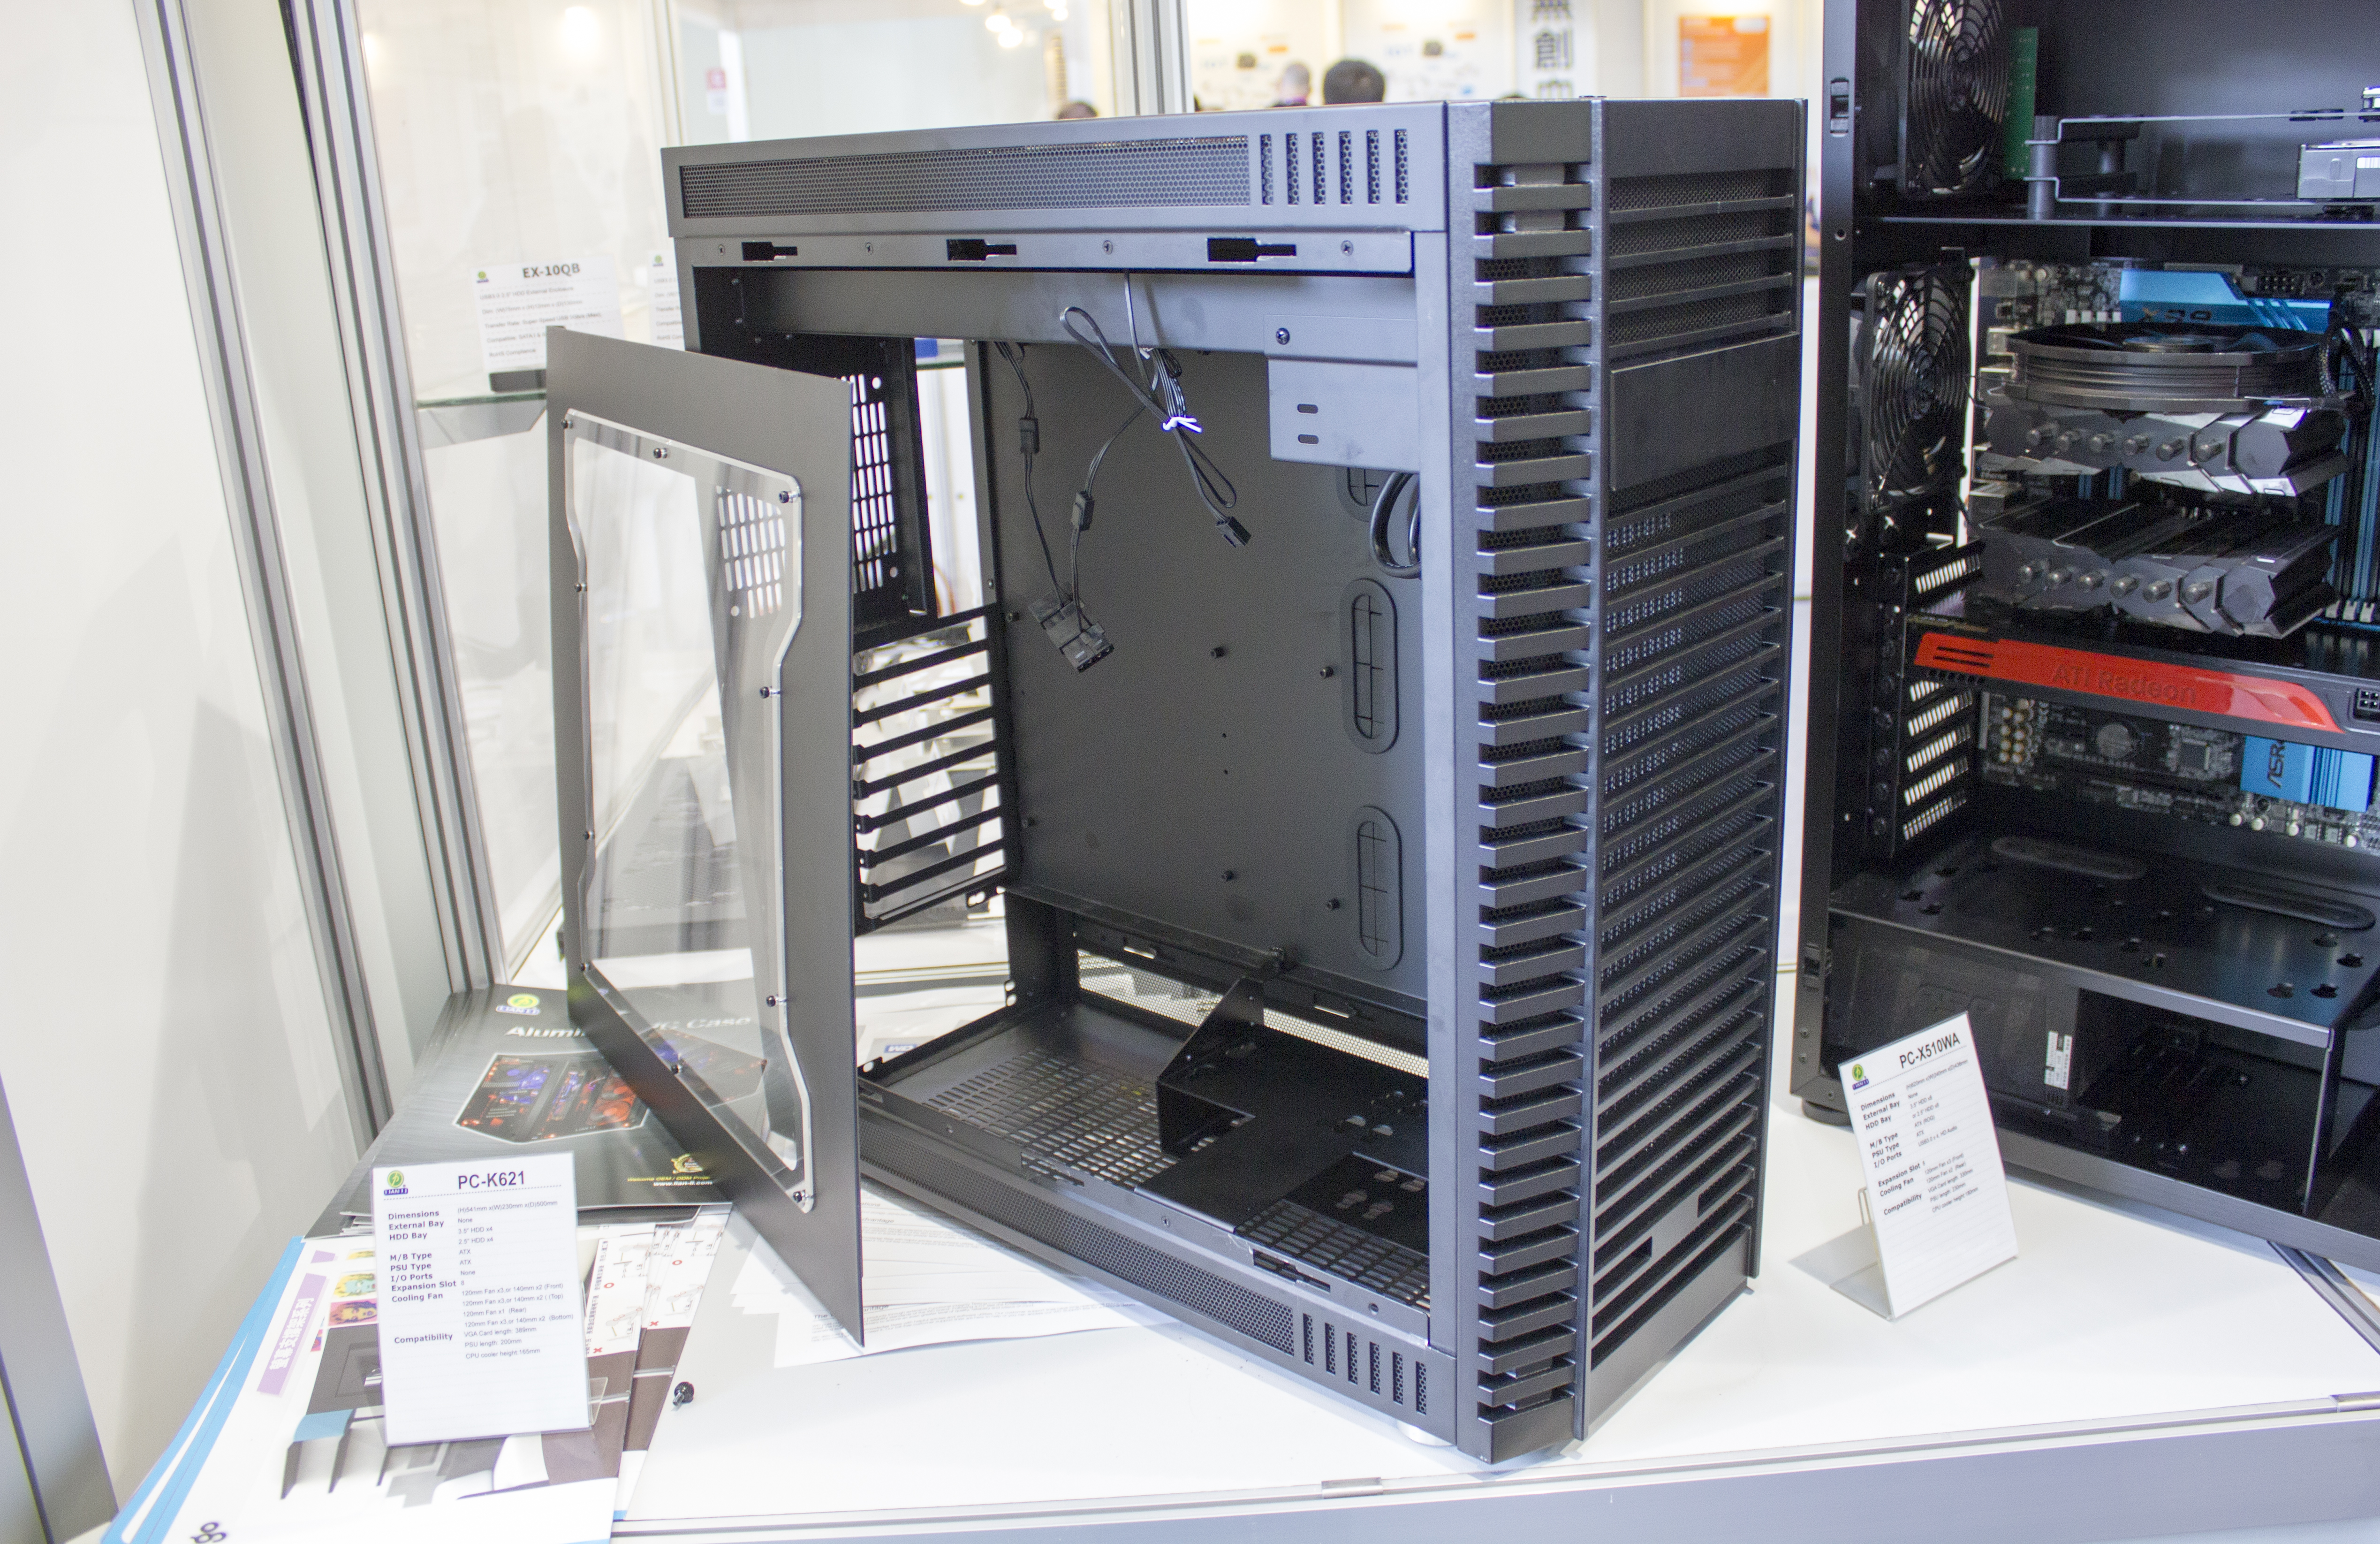 Fractal Design Launches Two New Cases At Computex